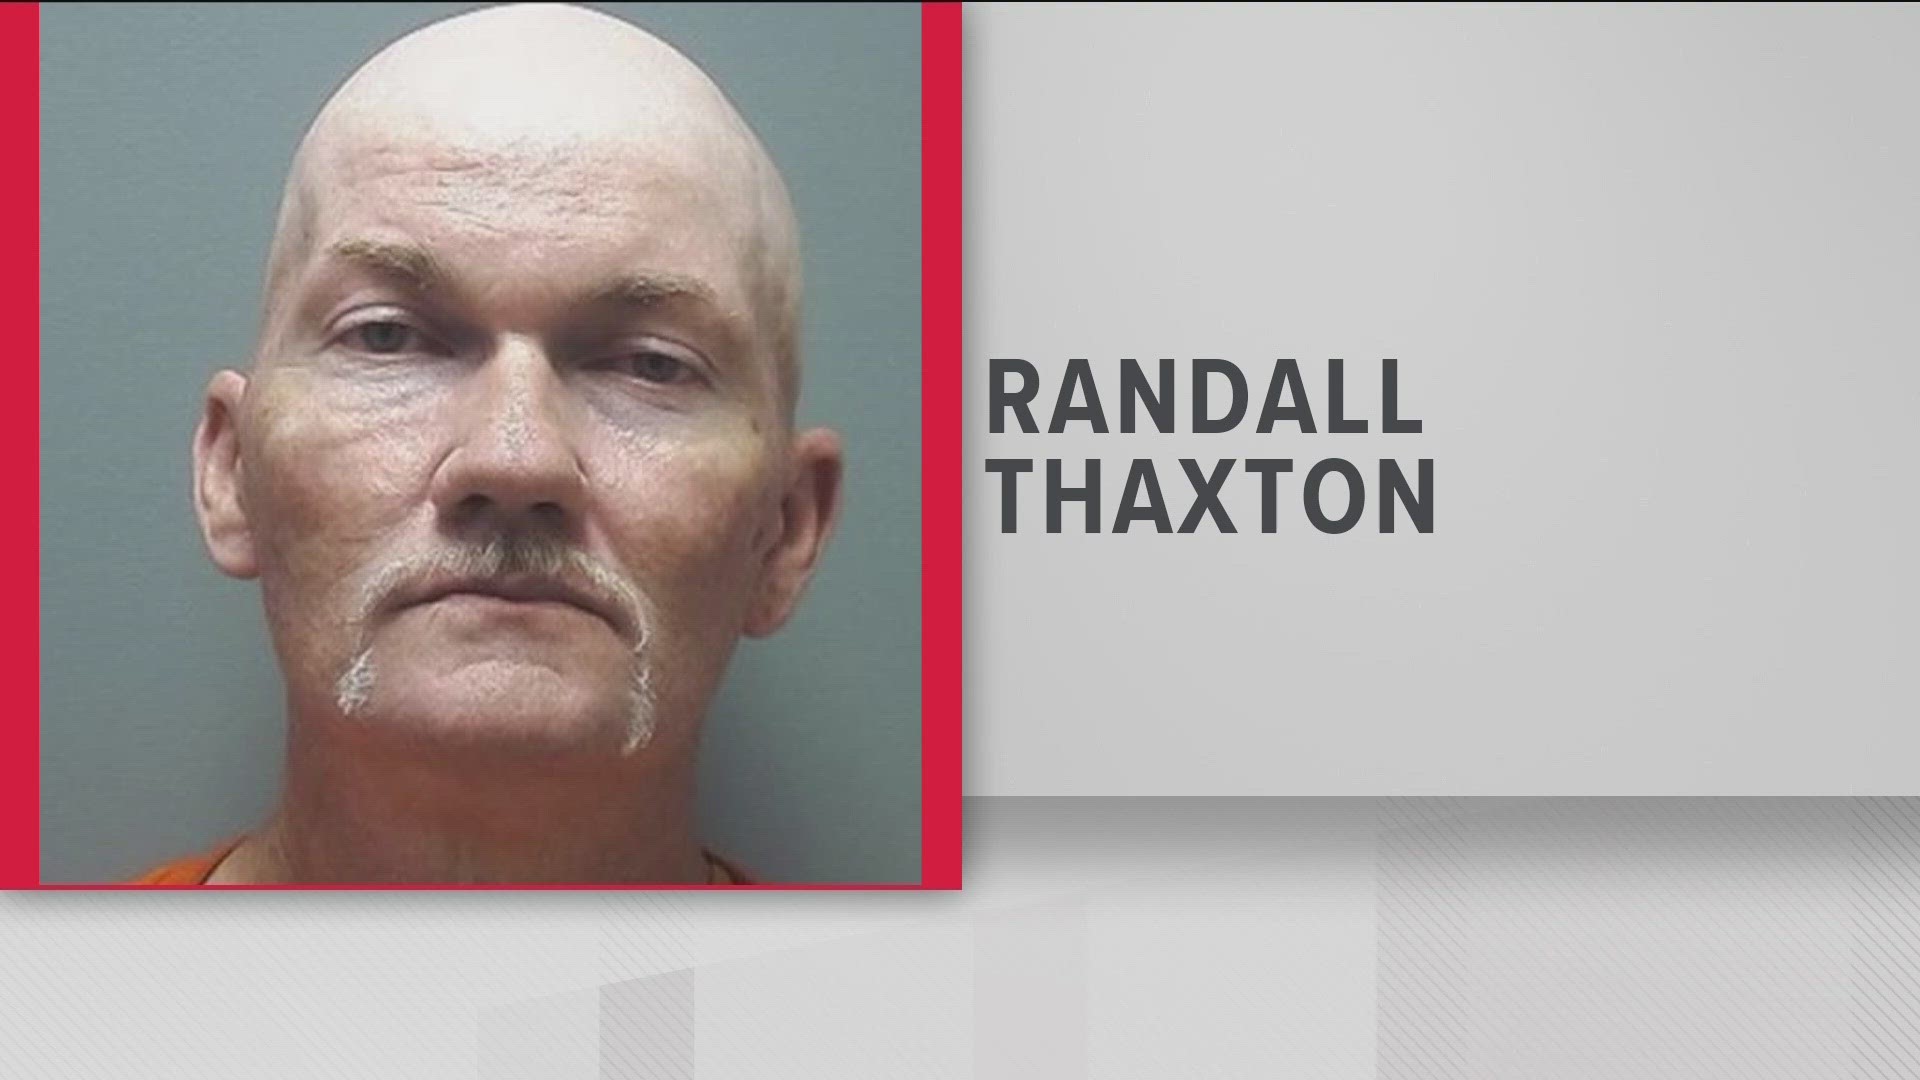 Thaxton was charged with nine counts of dog fighting and seven counts of animal cruelty.